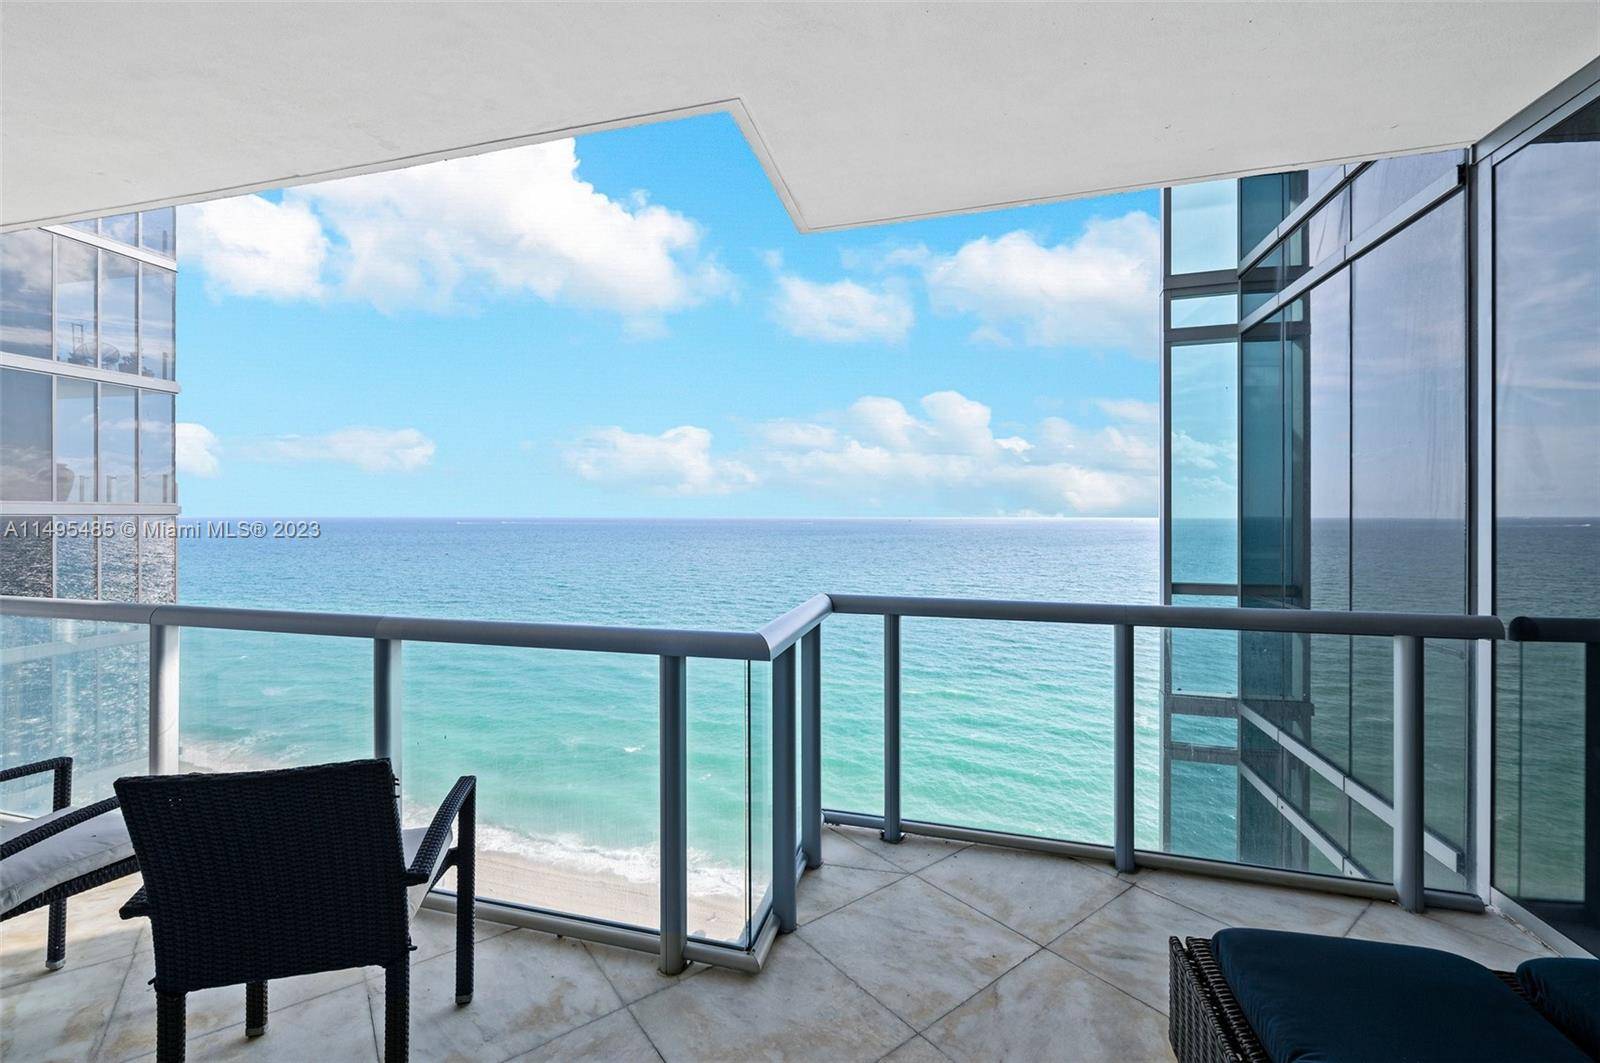 Discover coastal luxury at its zenith in Jade Ocean in this corner residence with floor to ceiling windows on three sides, offering breathtaking direct ocean and city views.